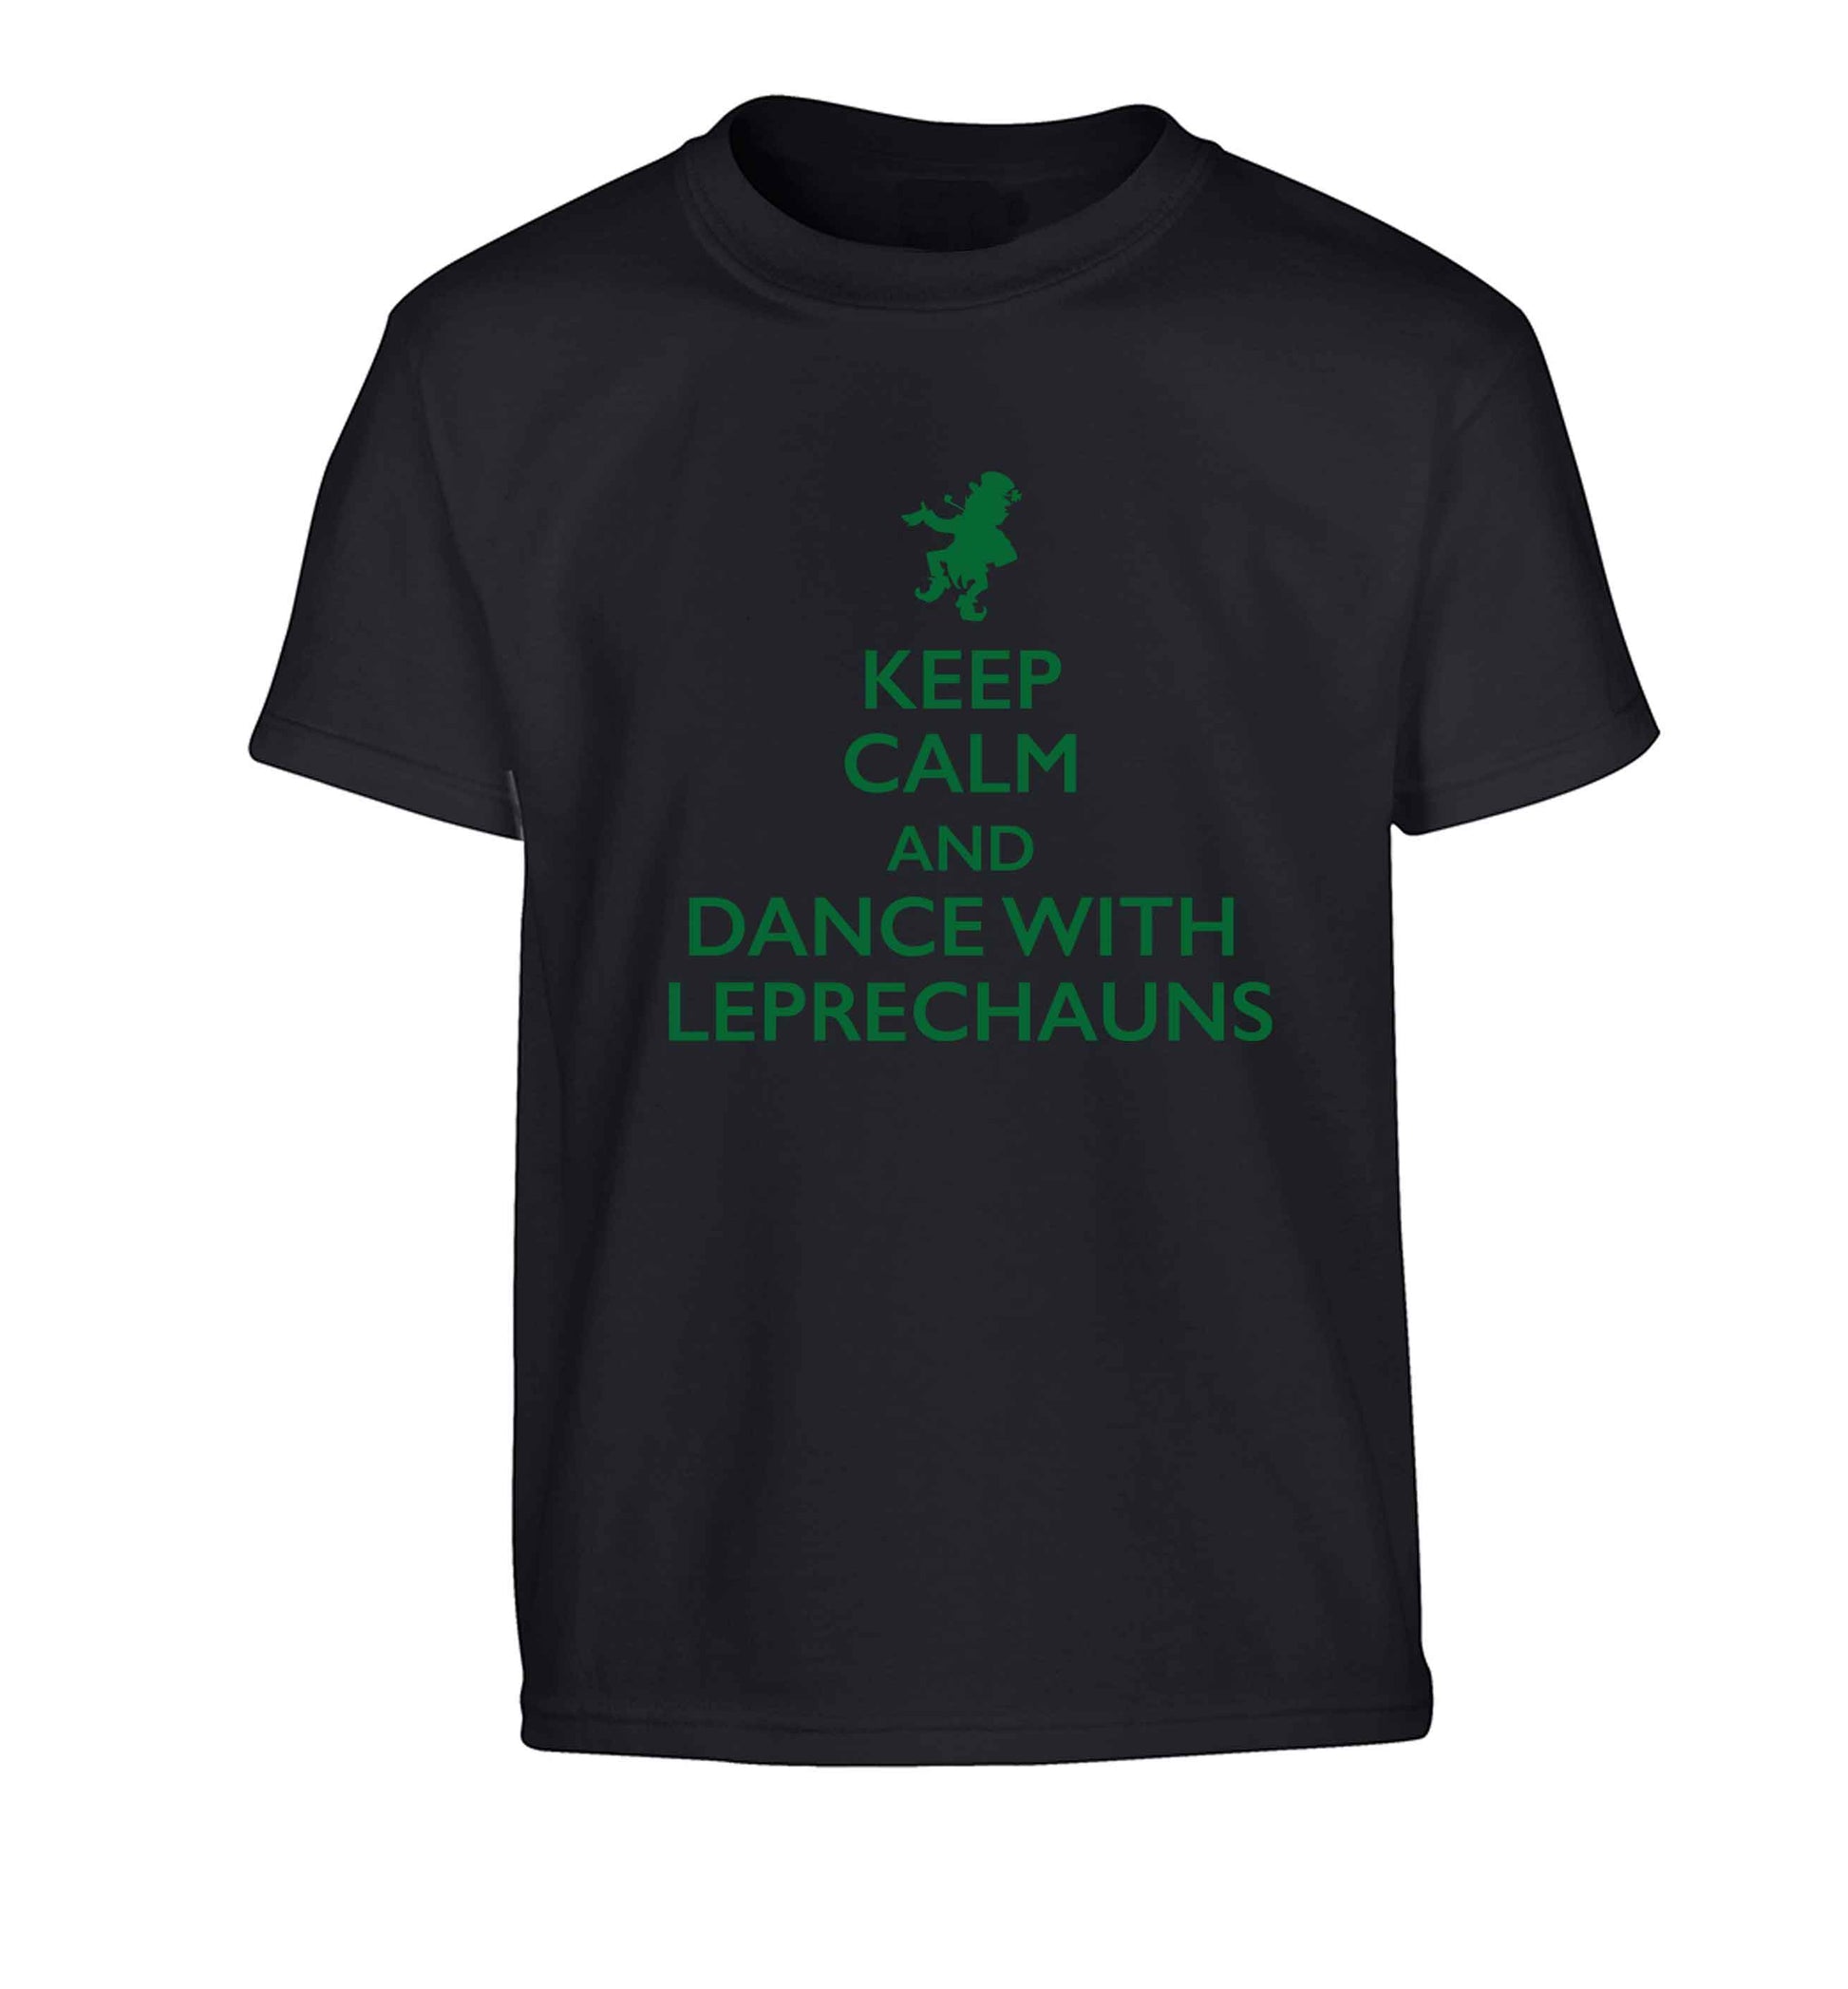 Keep calm and dance with leprechauns Children's black Tshirt 12-13 Years